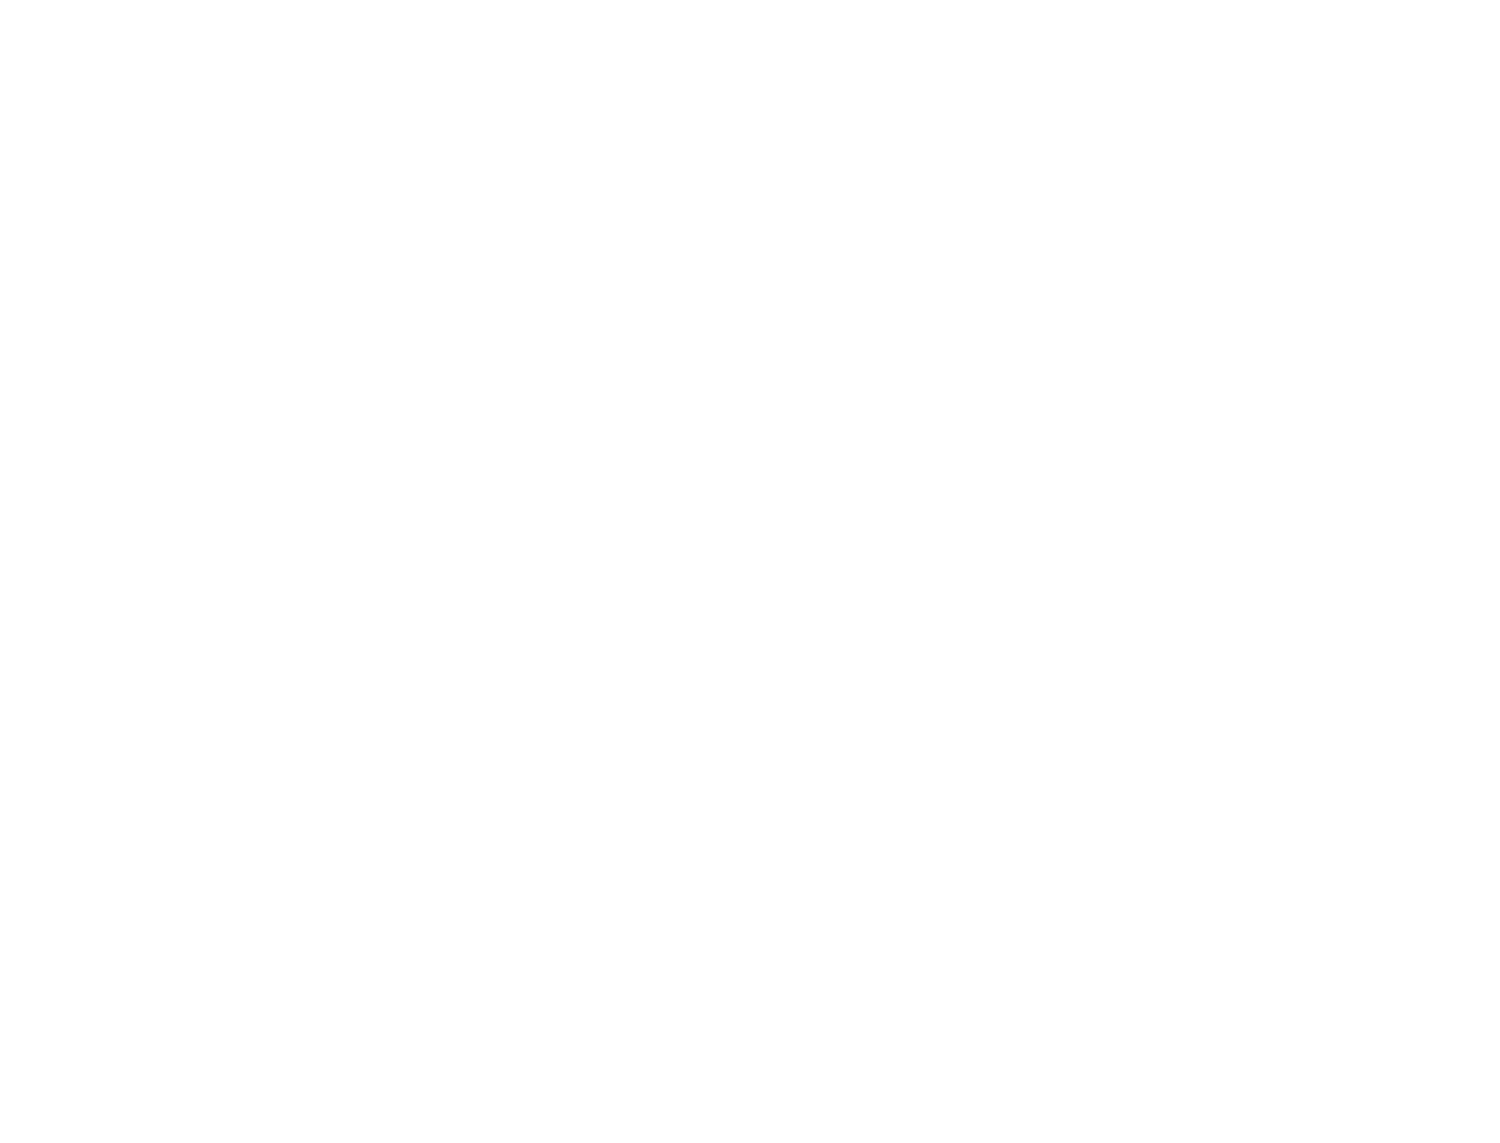 The GrowHaus